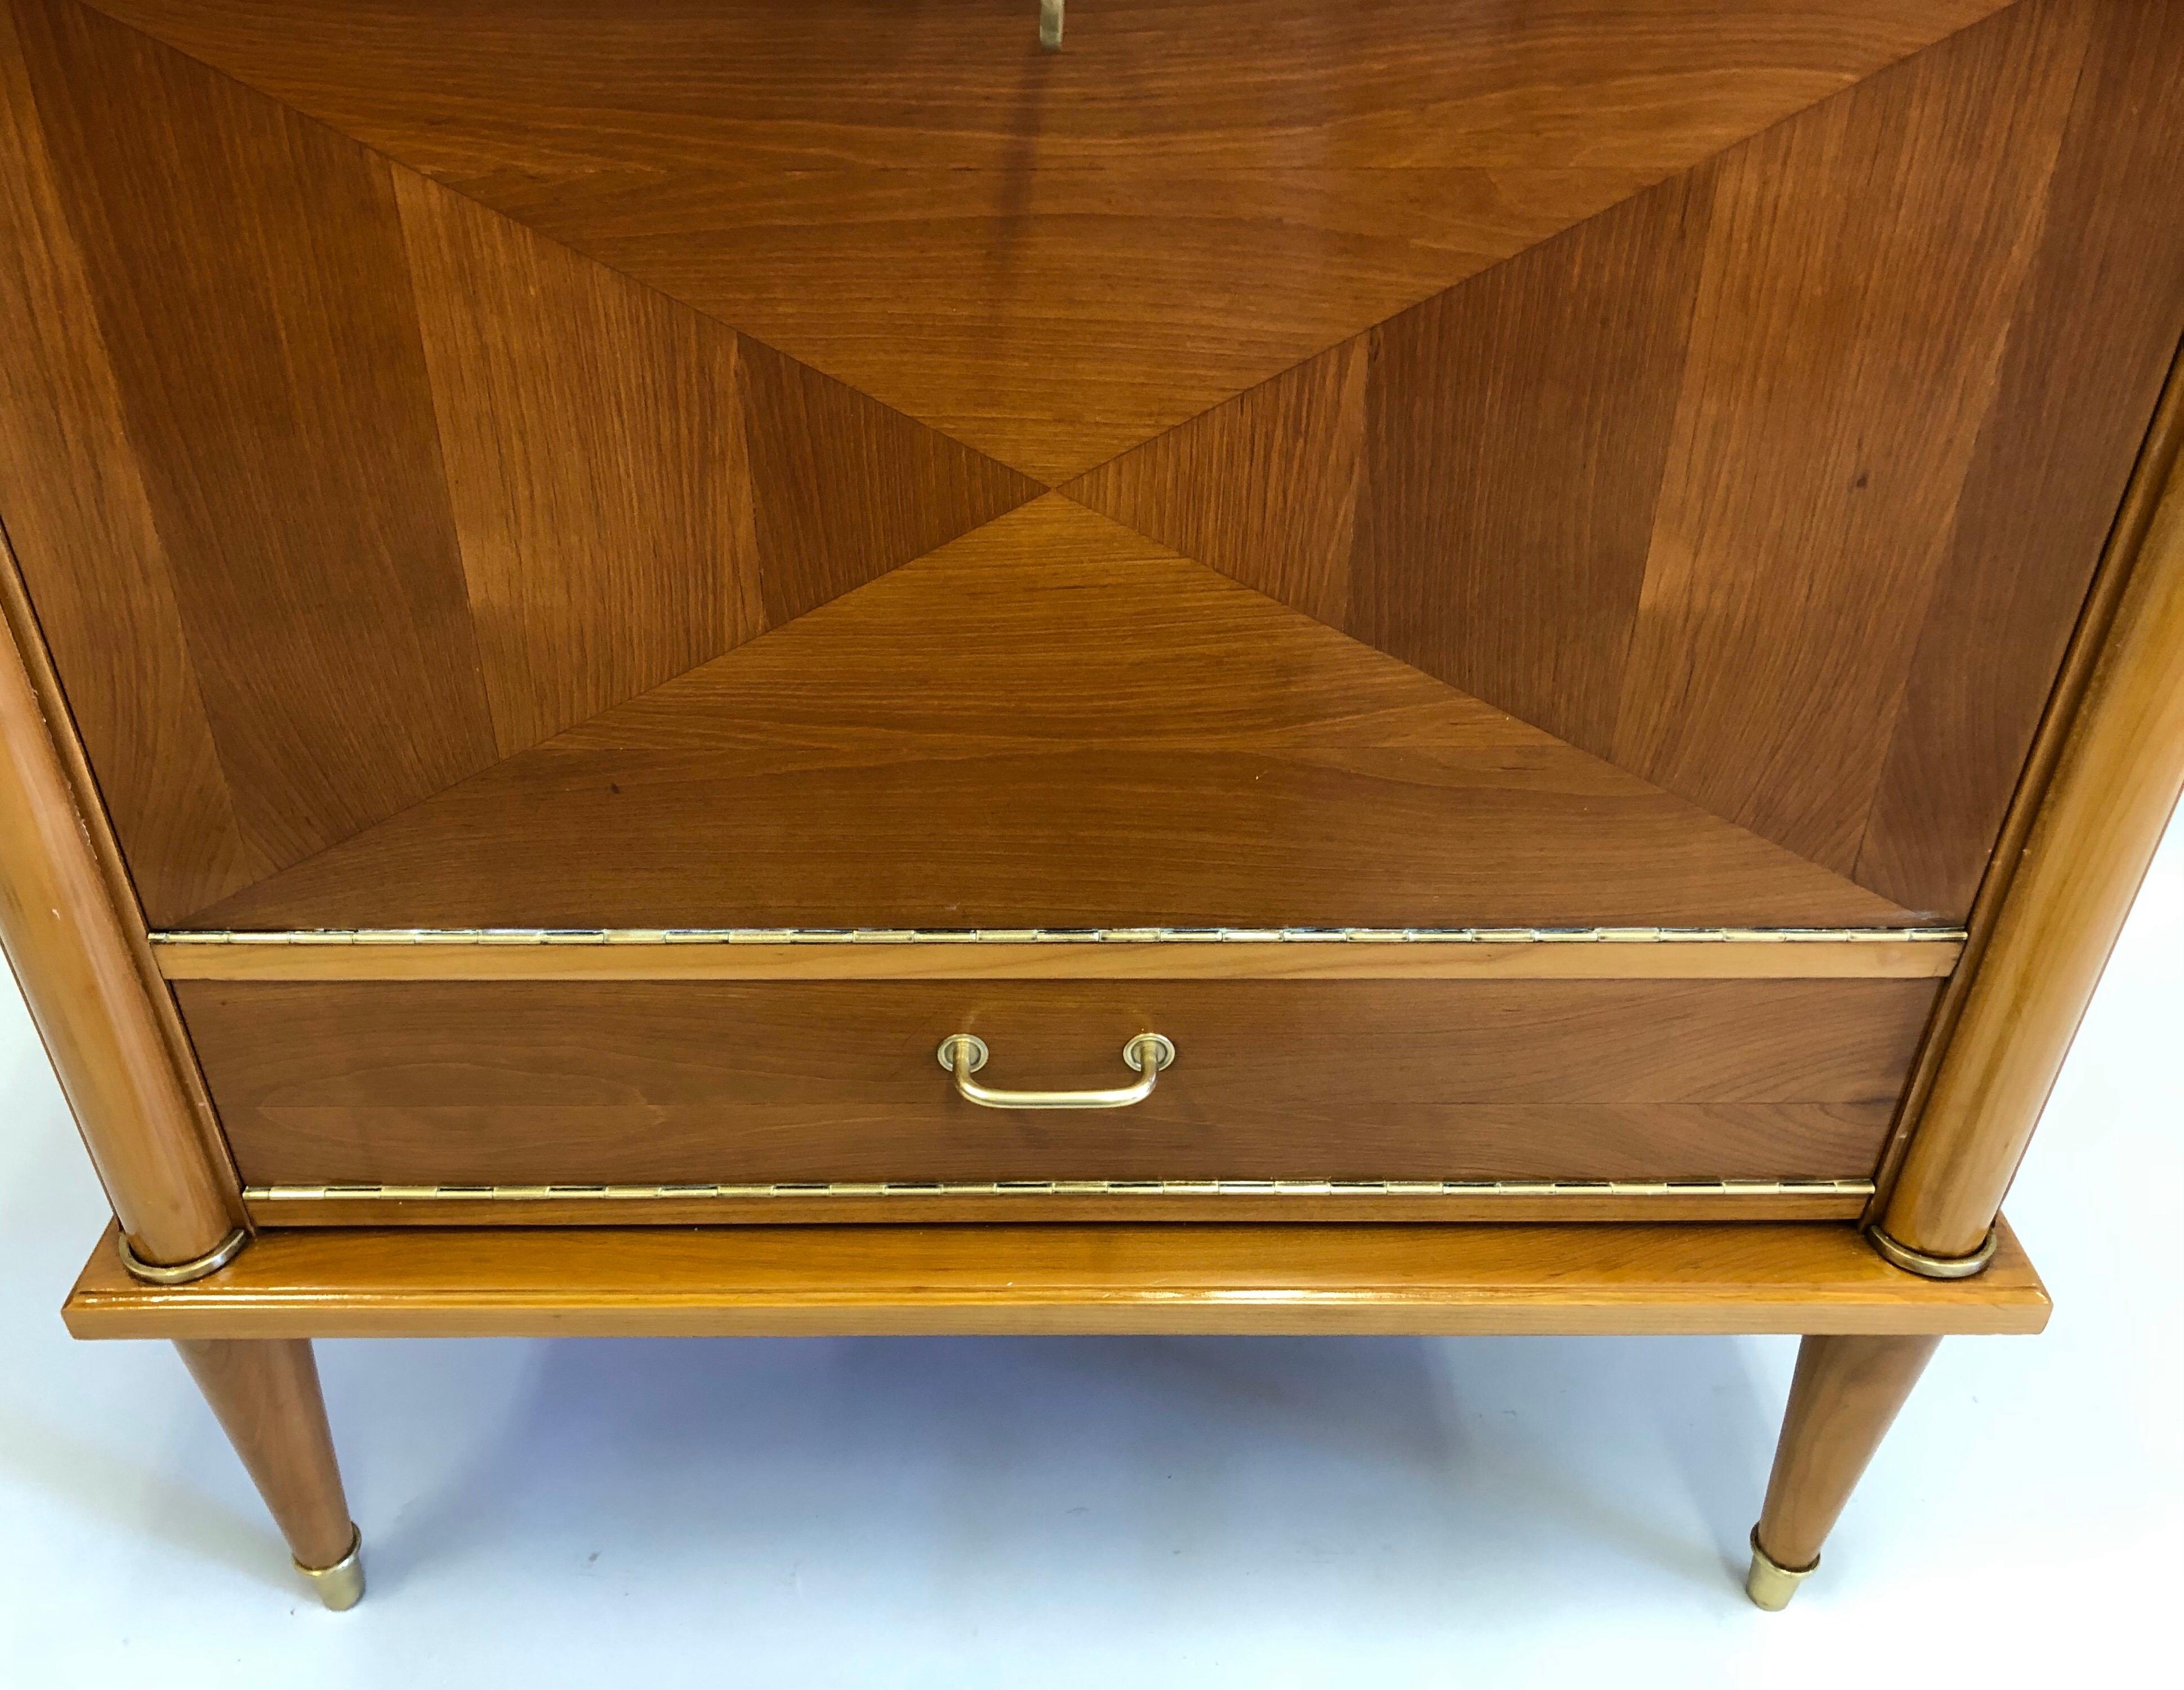 French Modern Neoclassical Cherry Inlay Sideboard/ Console/ Bar by Andre Arbus 1